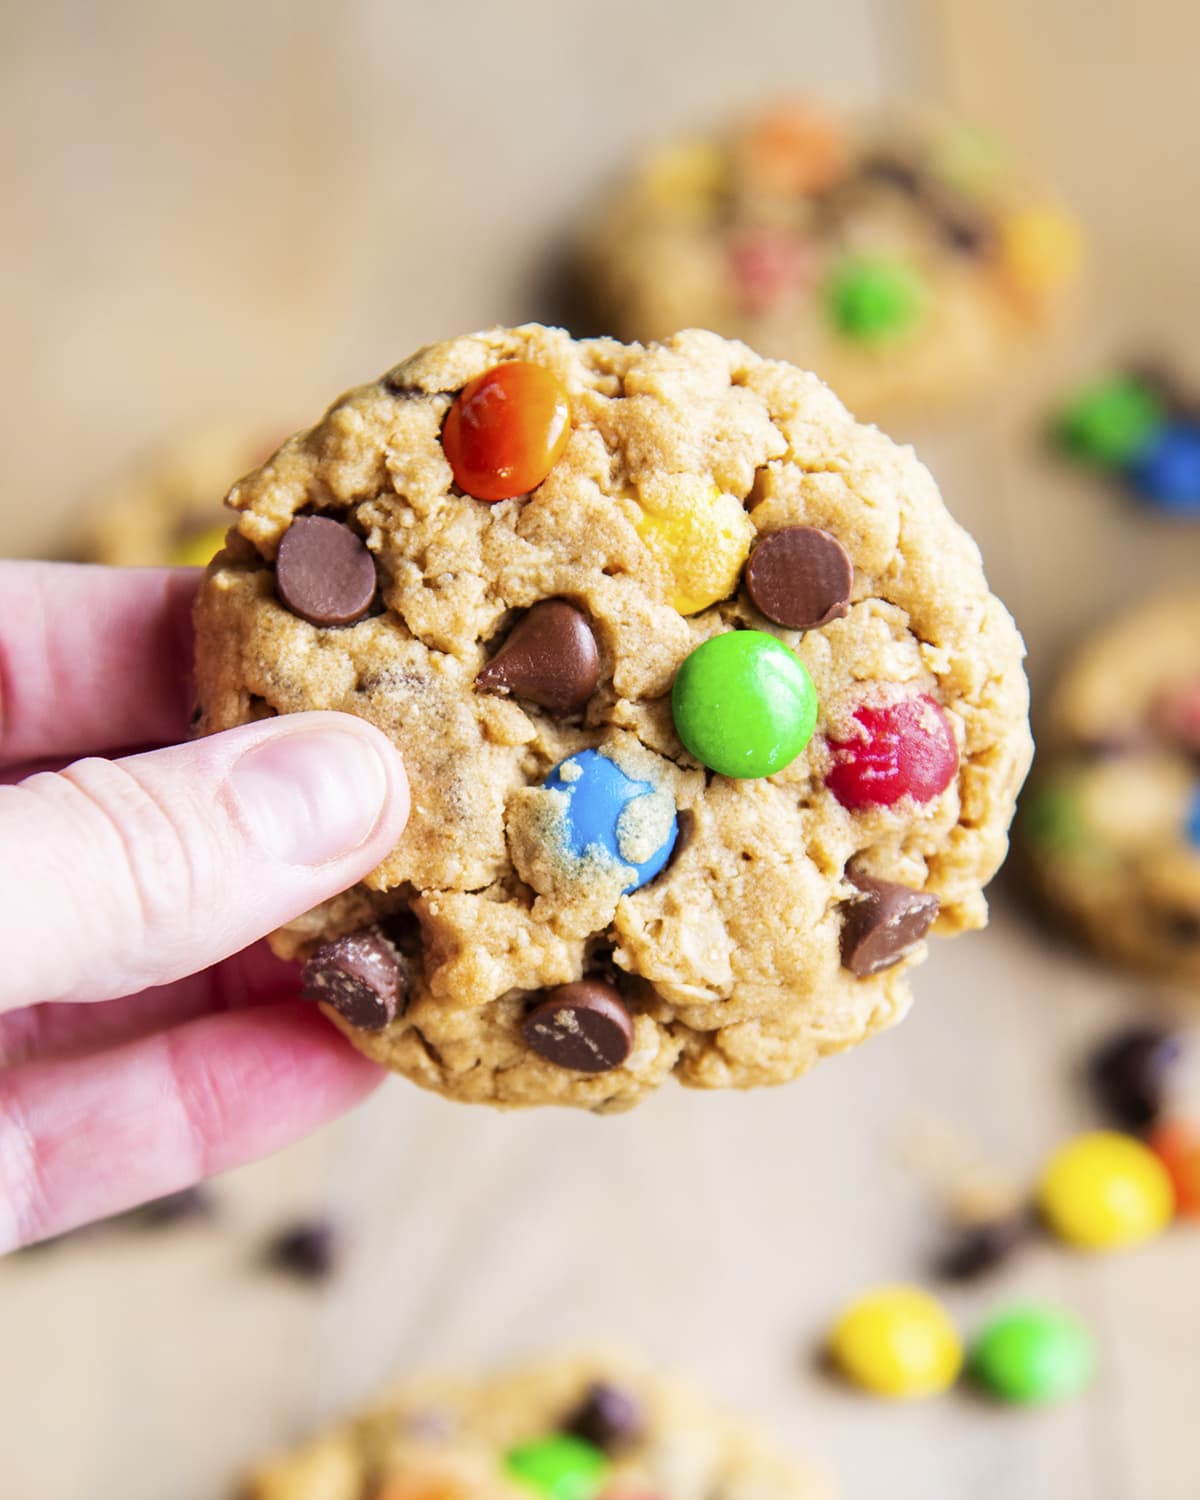 A hand holding a peanut butter and oatmeal cookie with m&ms and chocolate chips on top of it.